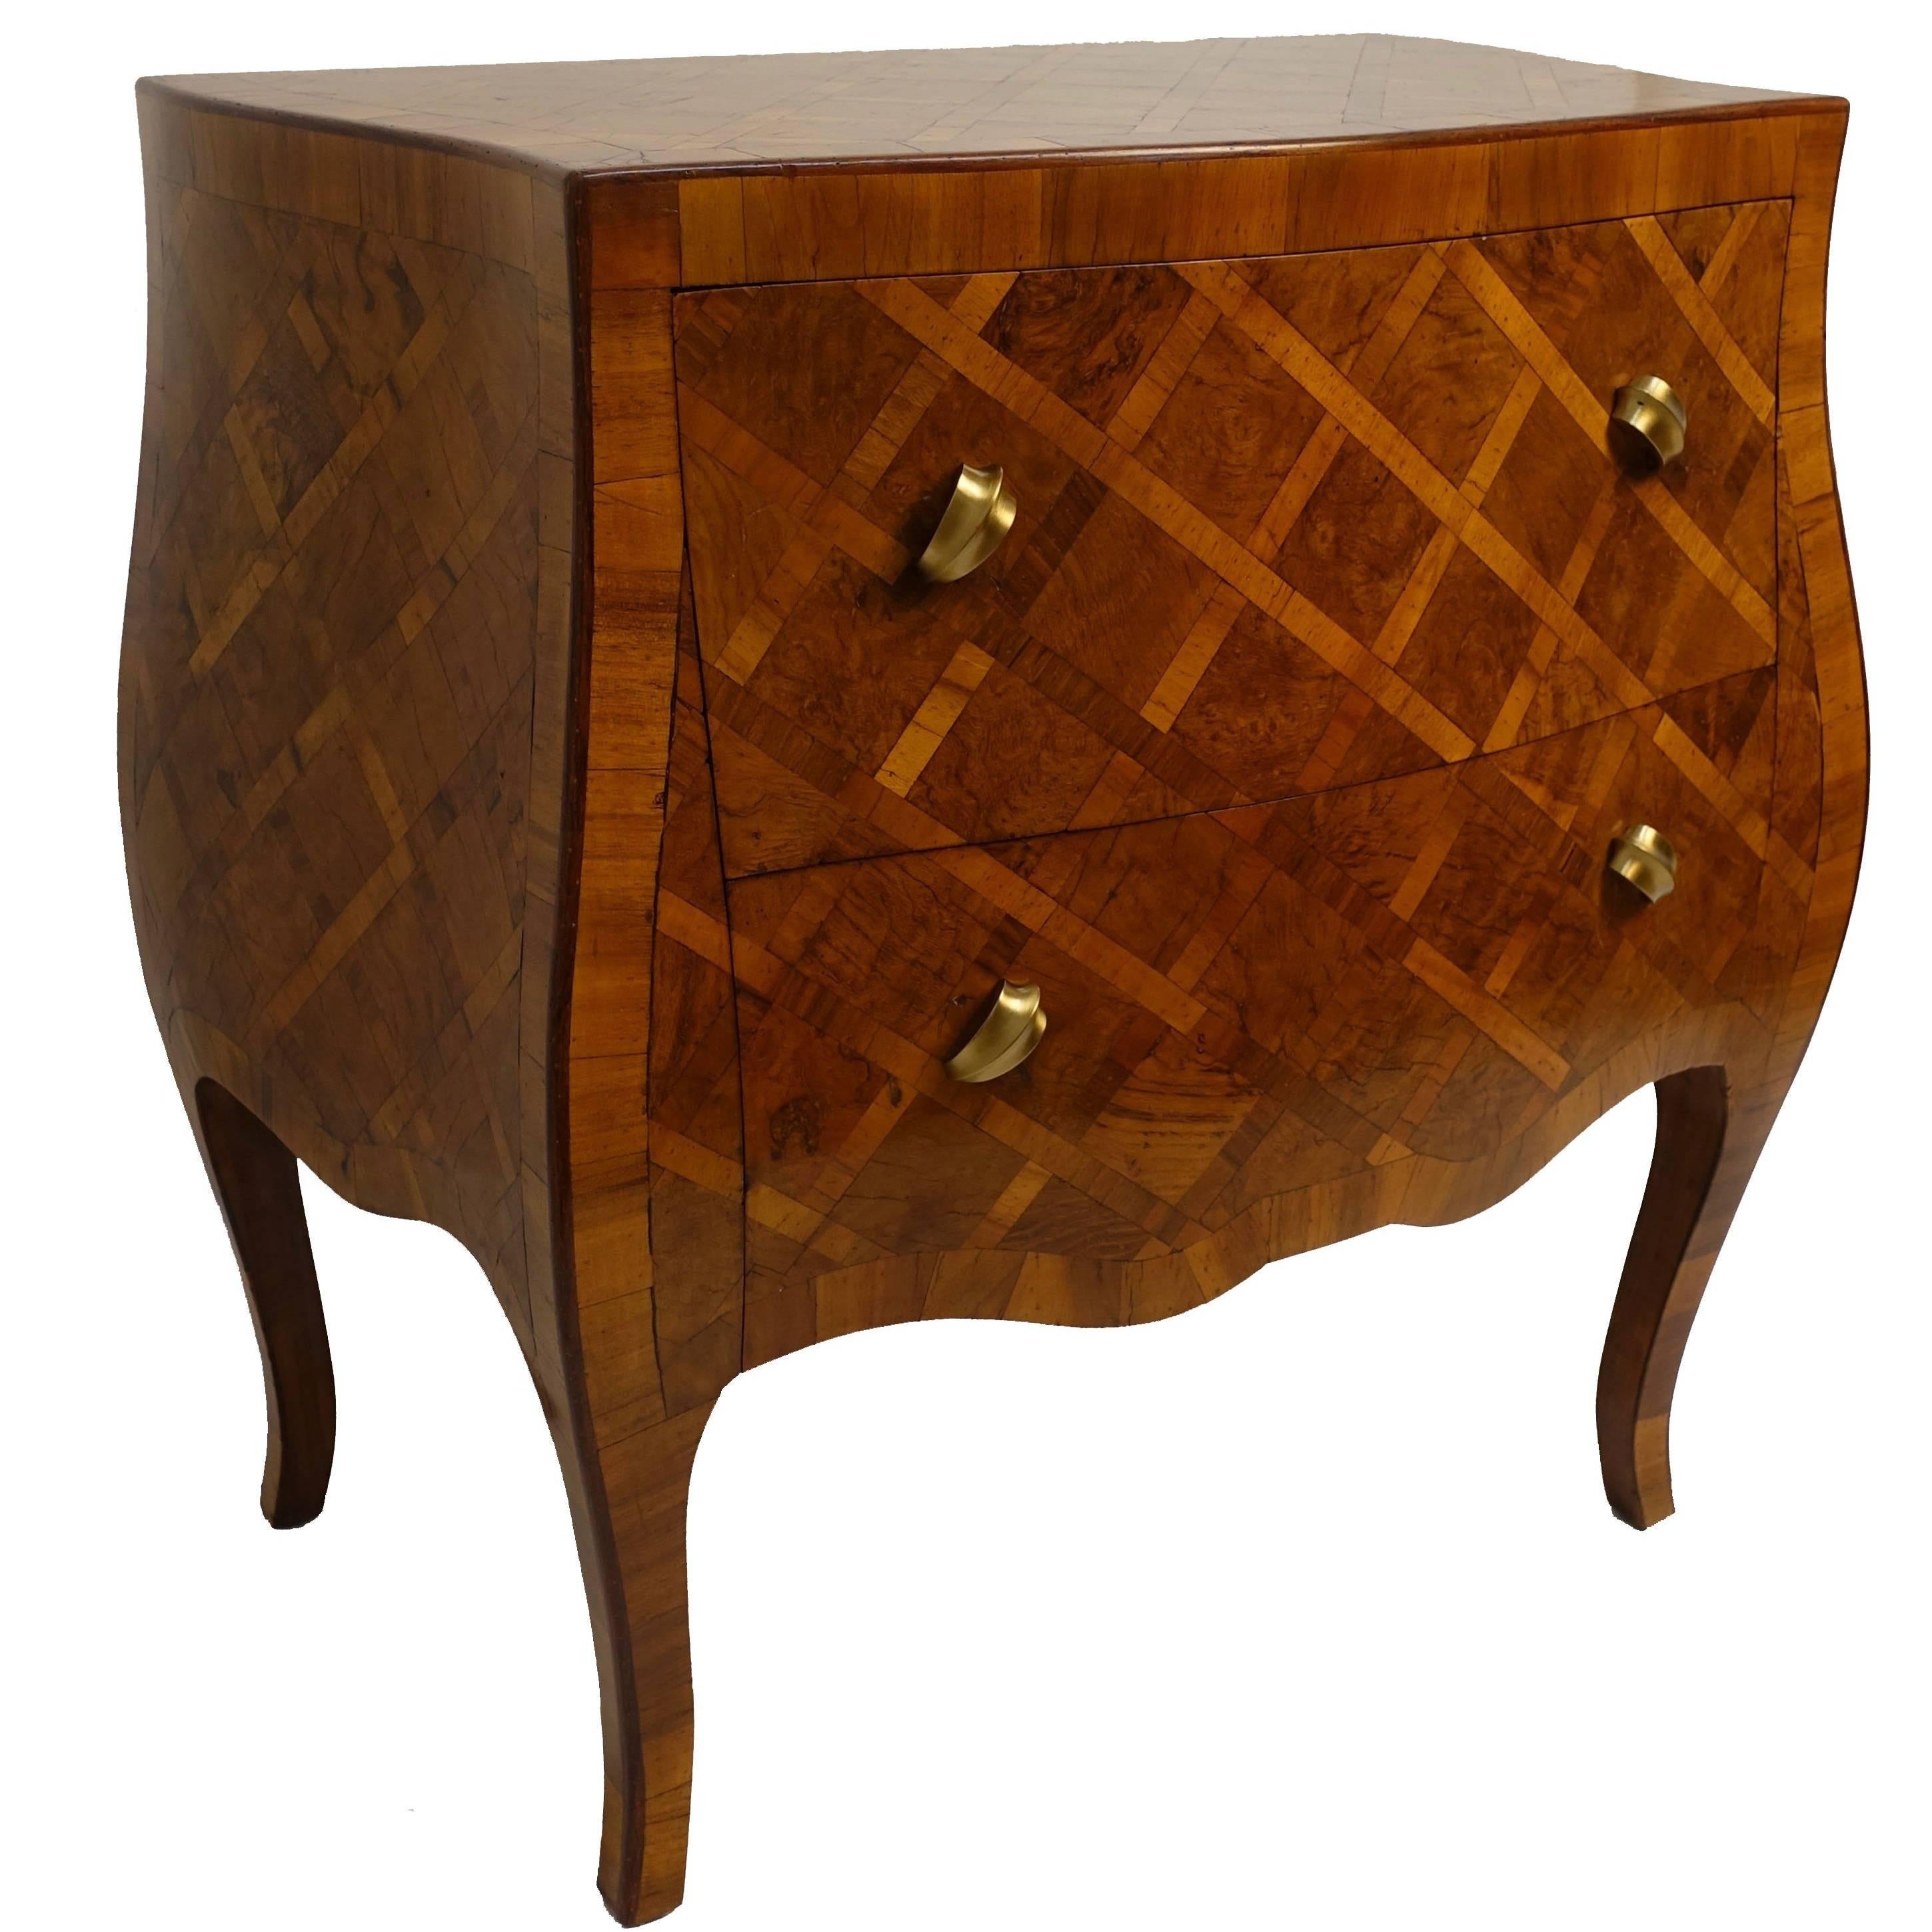 Italian Olivewood Bombe Commode with Parquetry Inlay